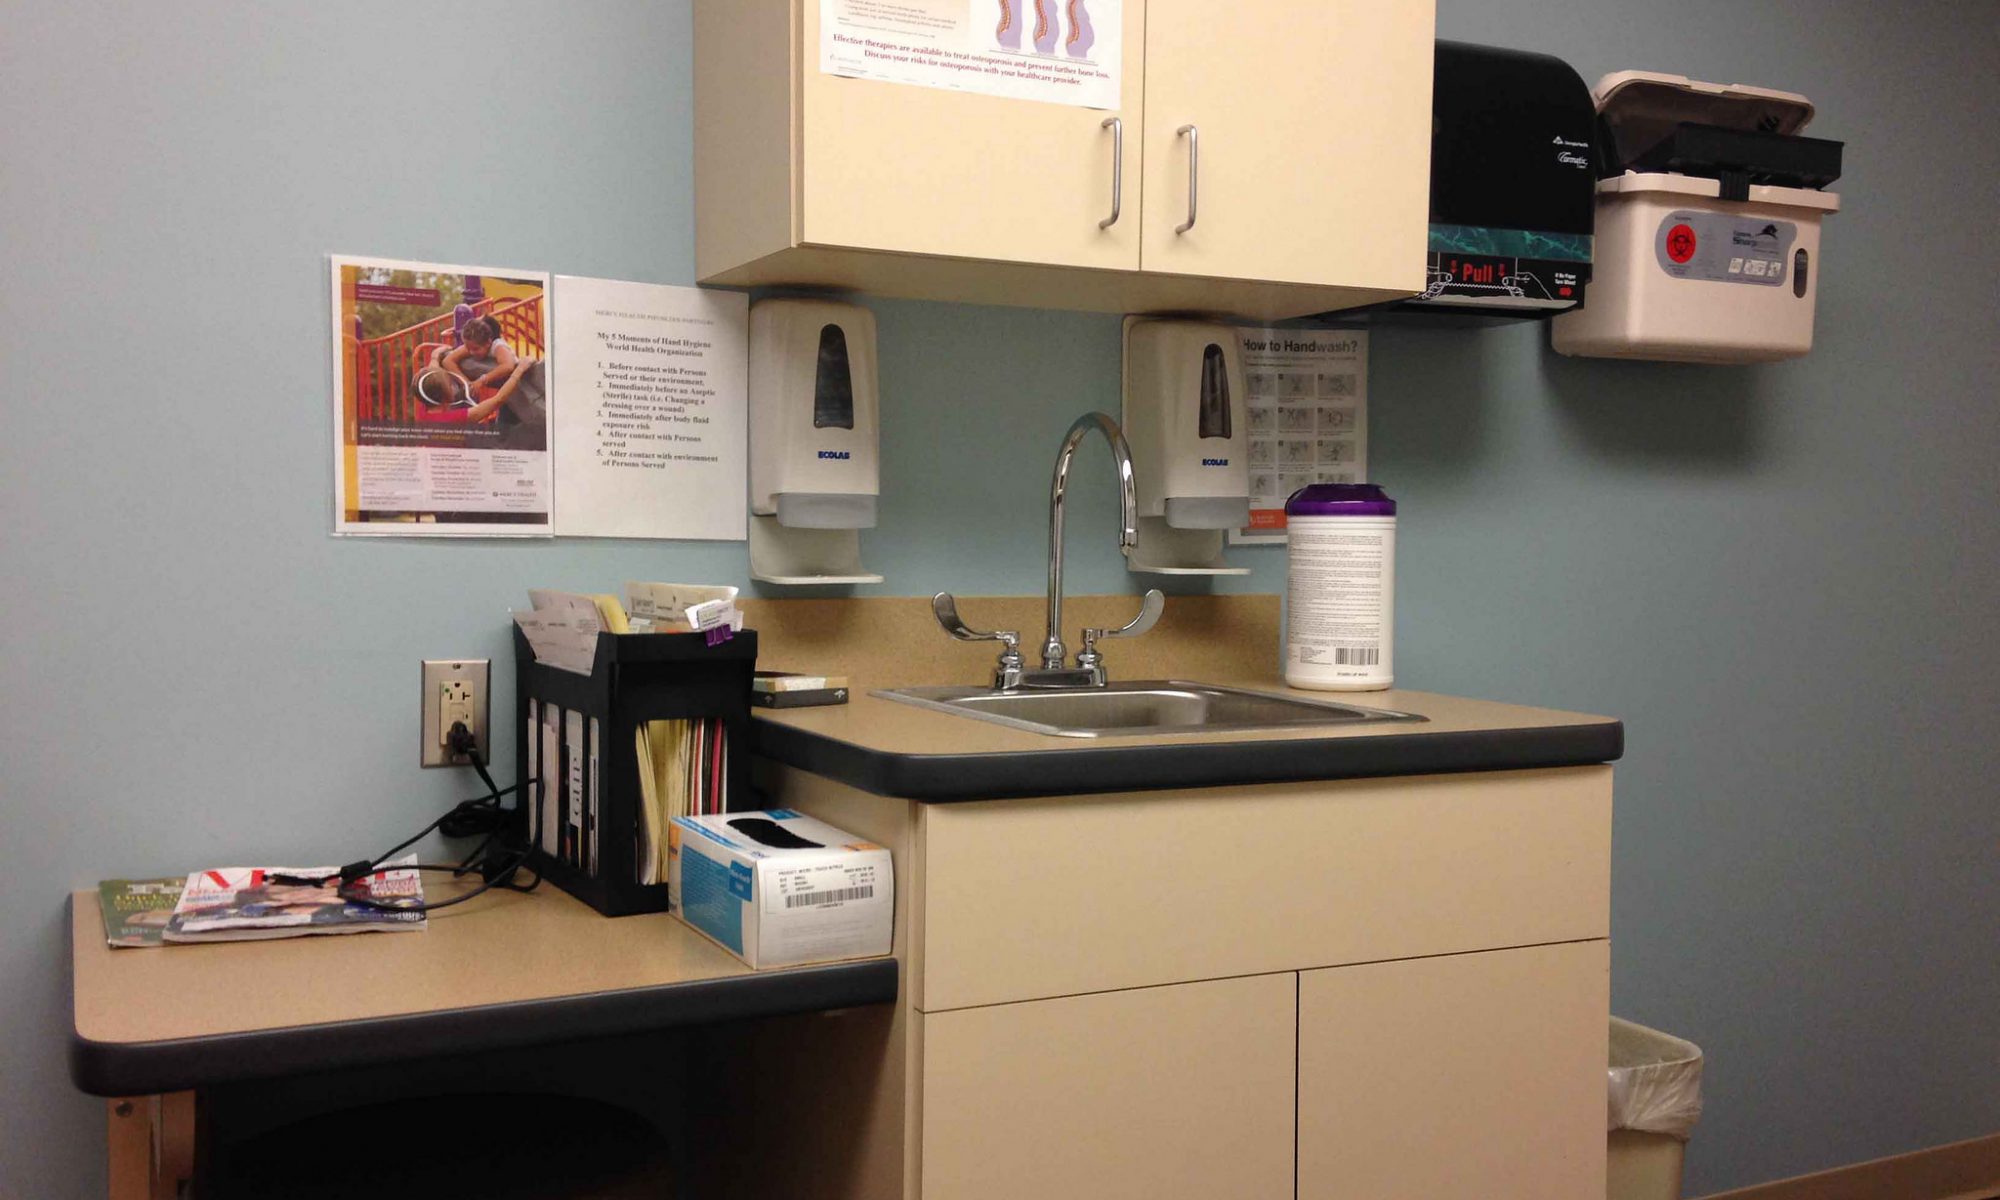 Photograph of an exam room in a doctor's office